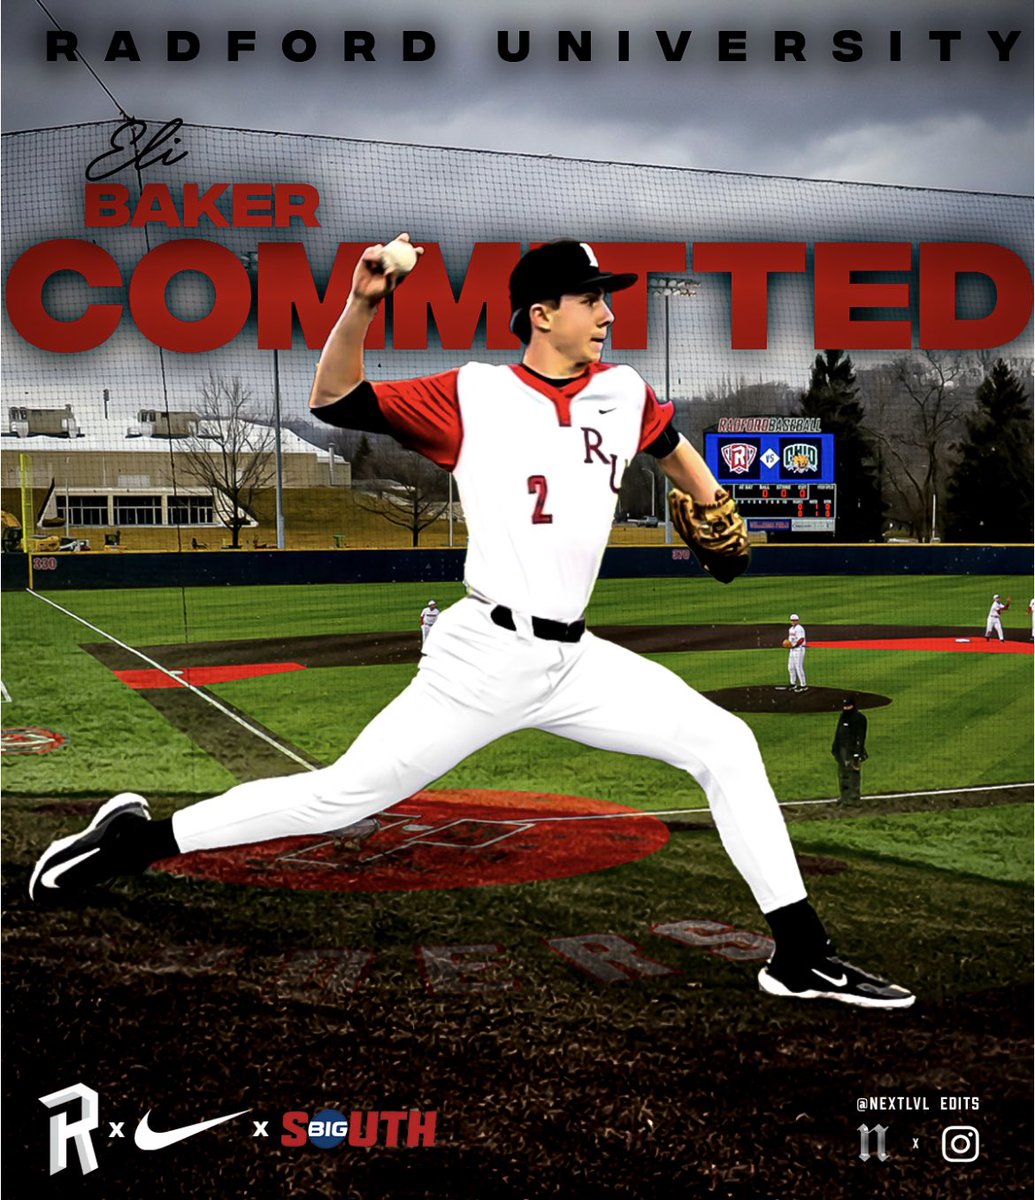 I’m excited and blessed to announce that I will be continuing my academic and athletic career at Radford University. I would like to thank God, my family, my coaches, and my teammates who helped me along the journey! #riseanddefend 🛡️@RadfordBaseball @AGBaseball9 @wcbourne